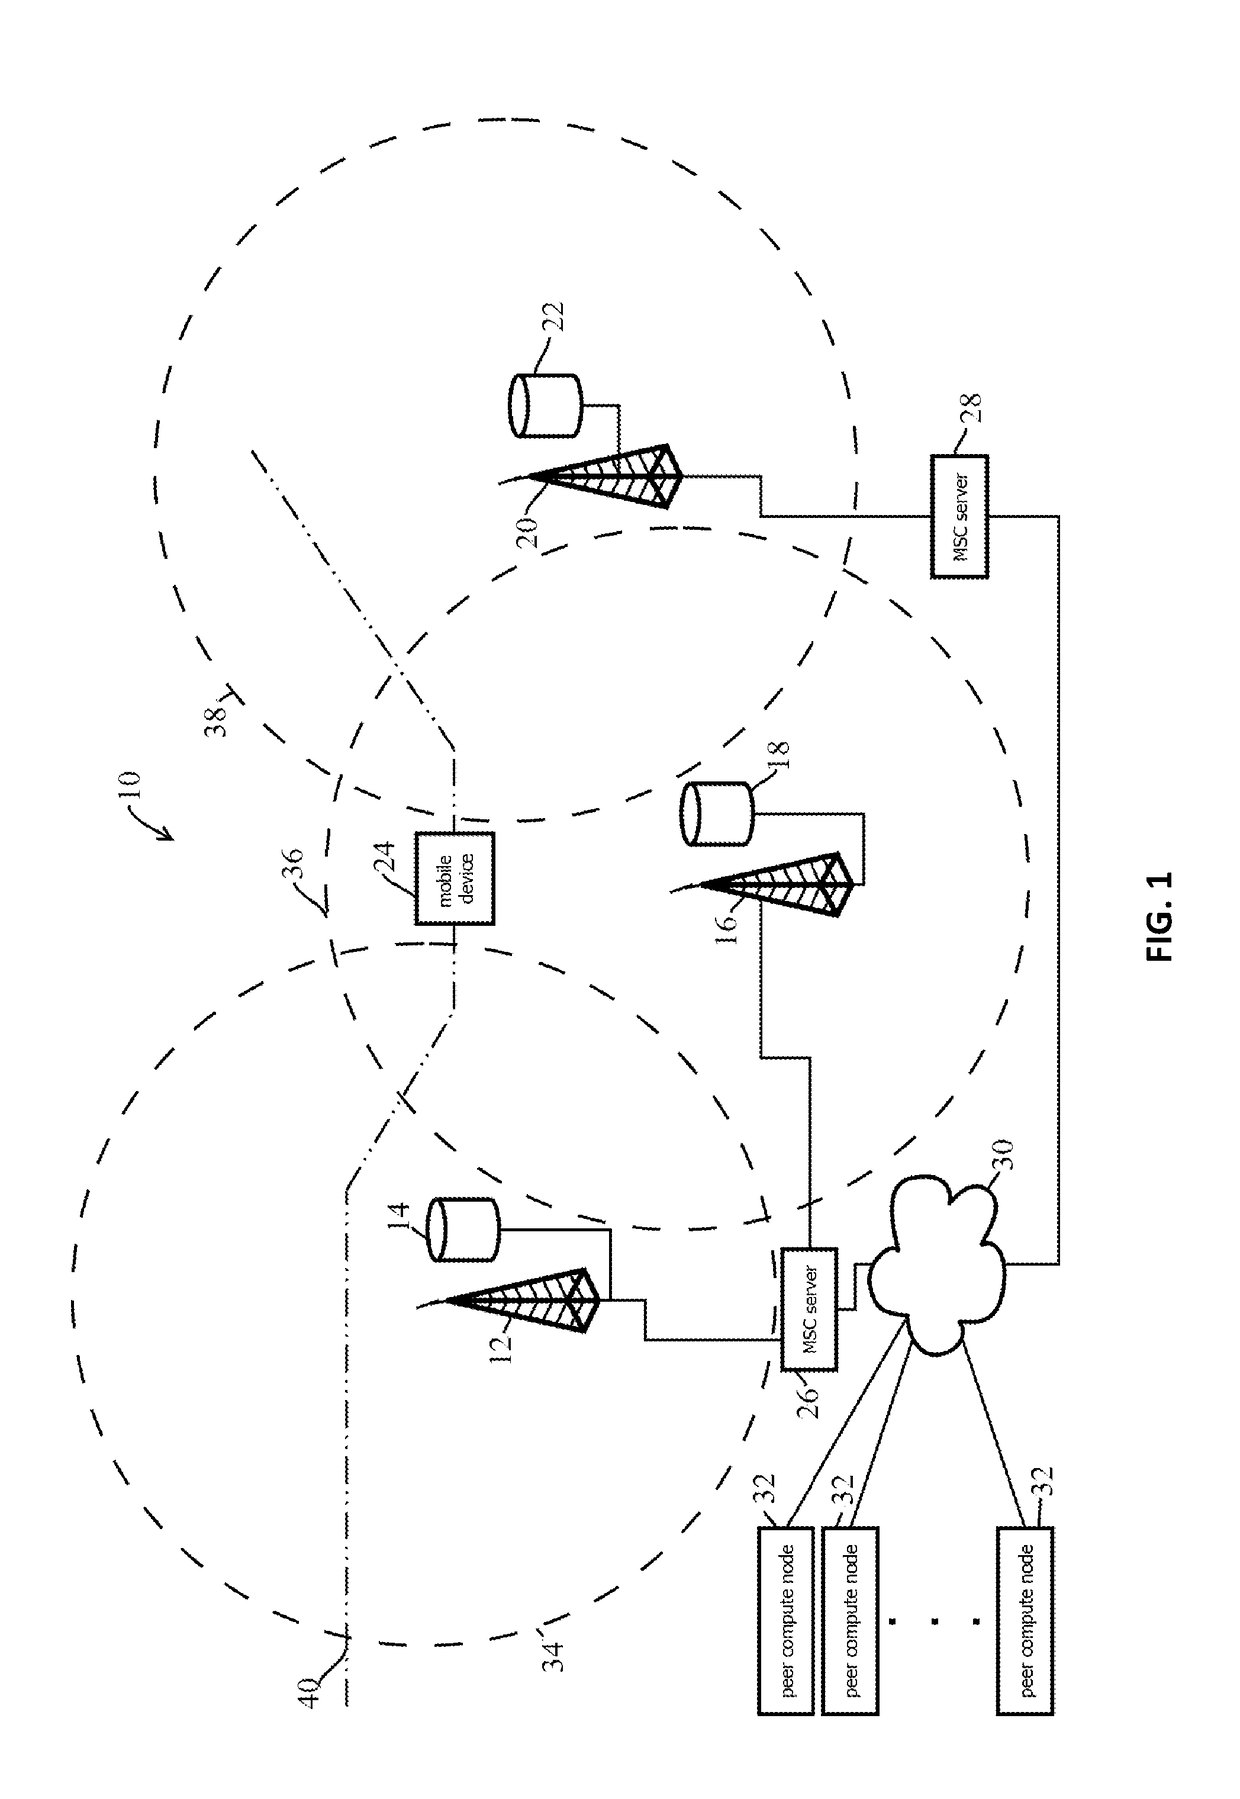 Distributed handoff-related processing for wireless networks